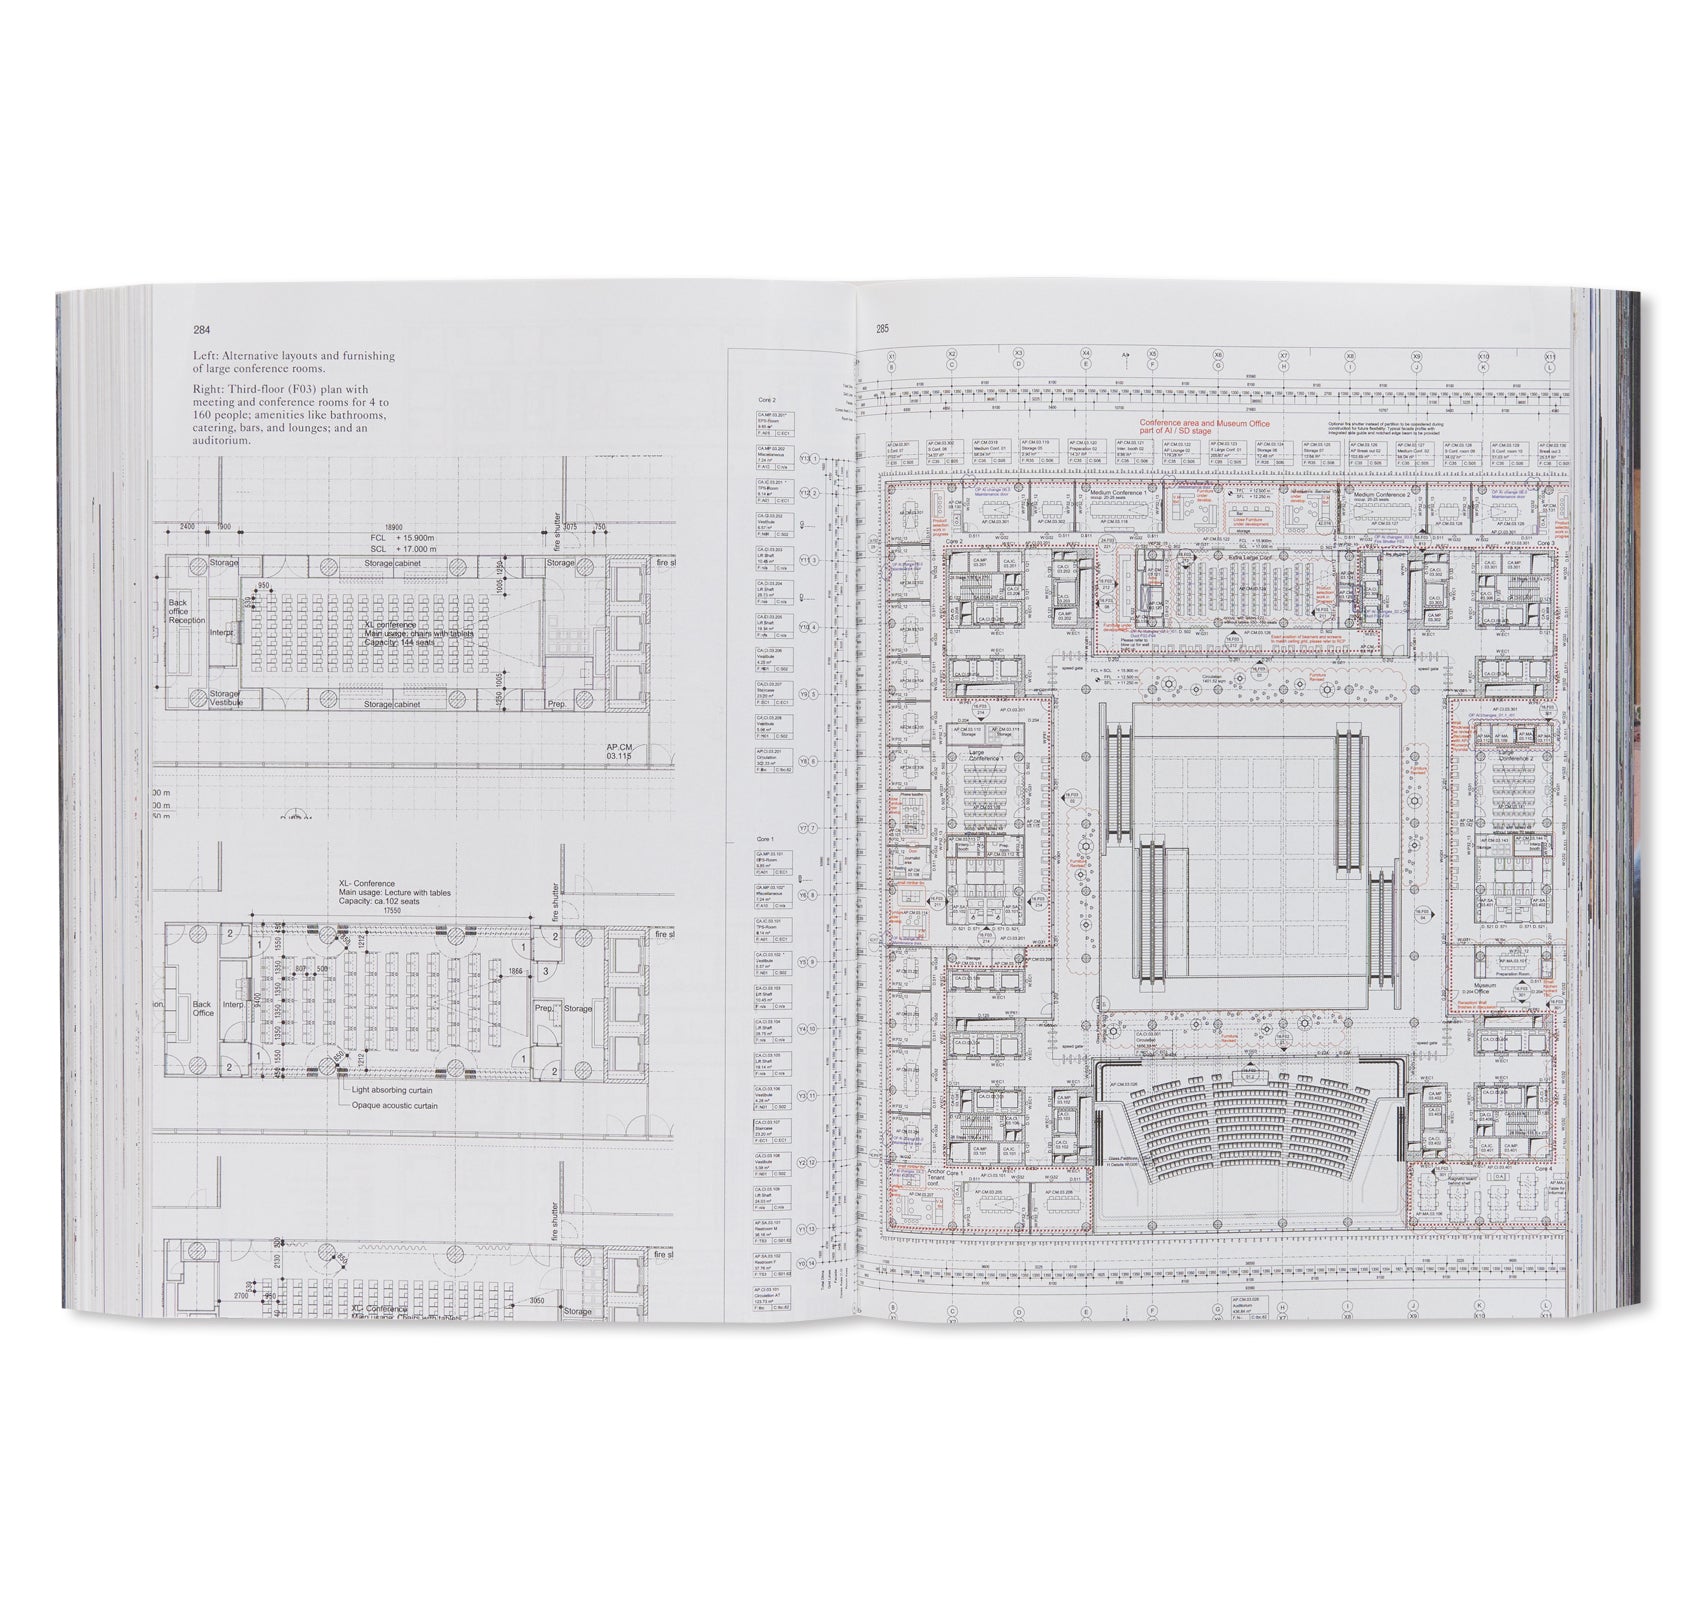 A BOOK ABOUT A LARGE BUILDING RECENTLY BUILT IN ASIA & AMOREPACIFIC HEADQUARTER by David Chipperfield